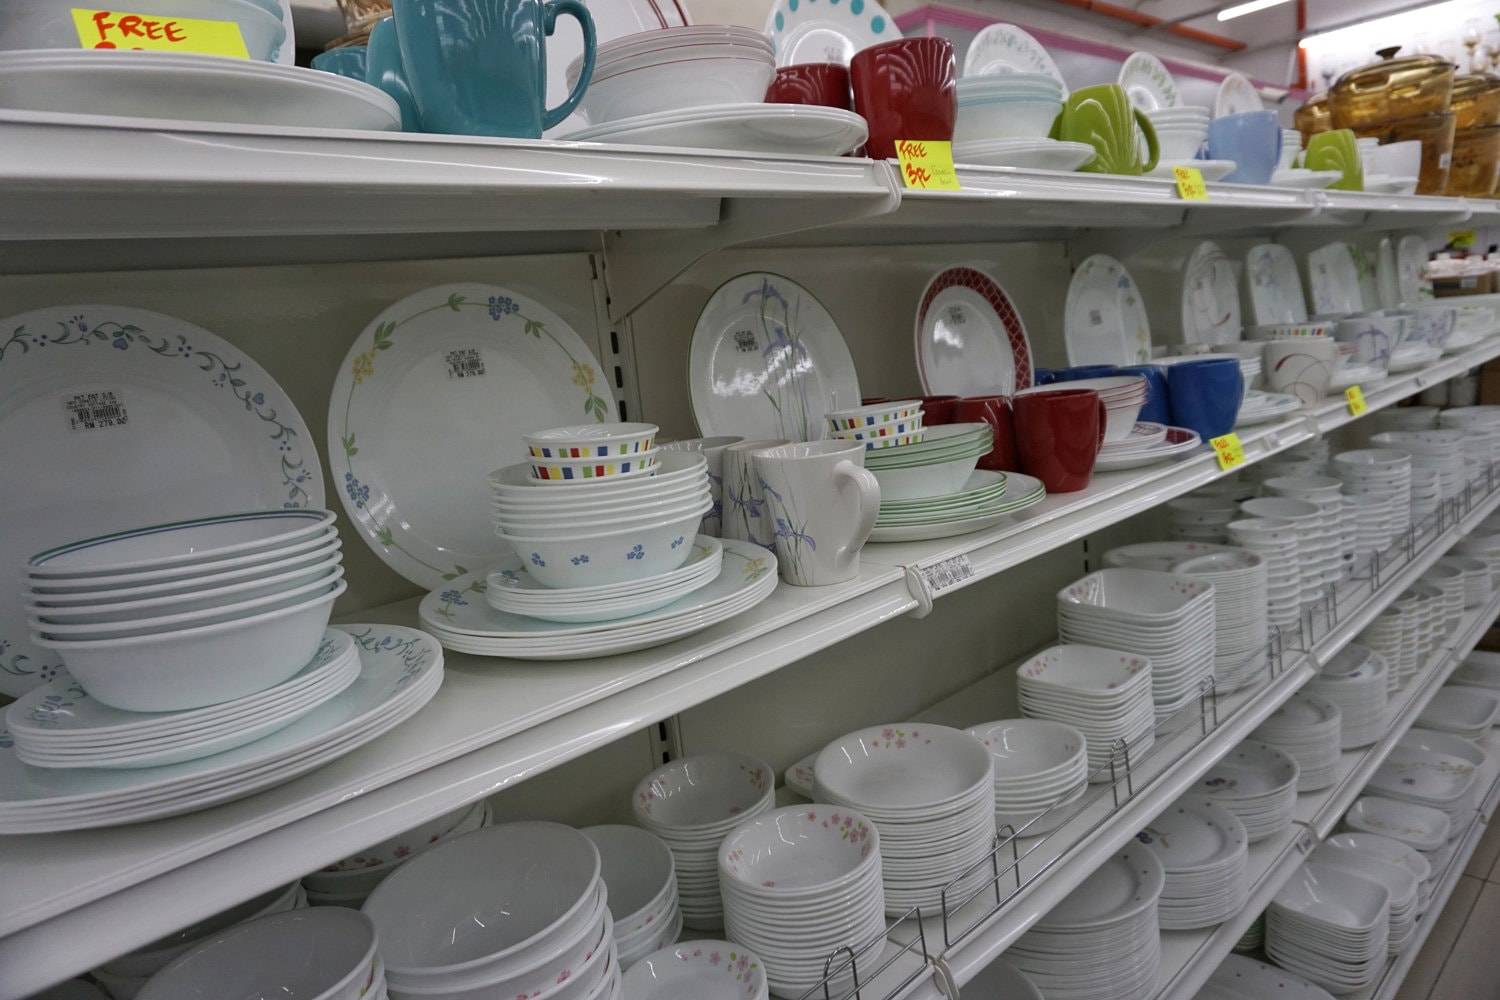 Dinnerware set Corelle brand pots, plates and cups on store shelves